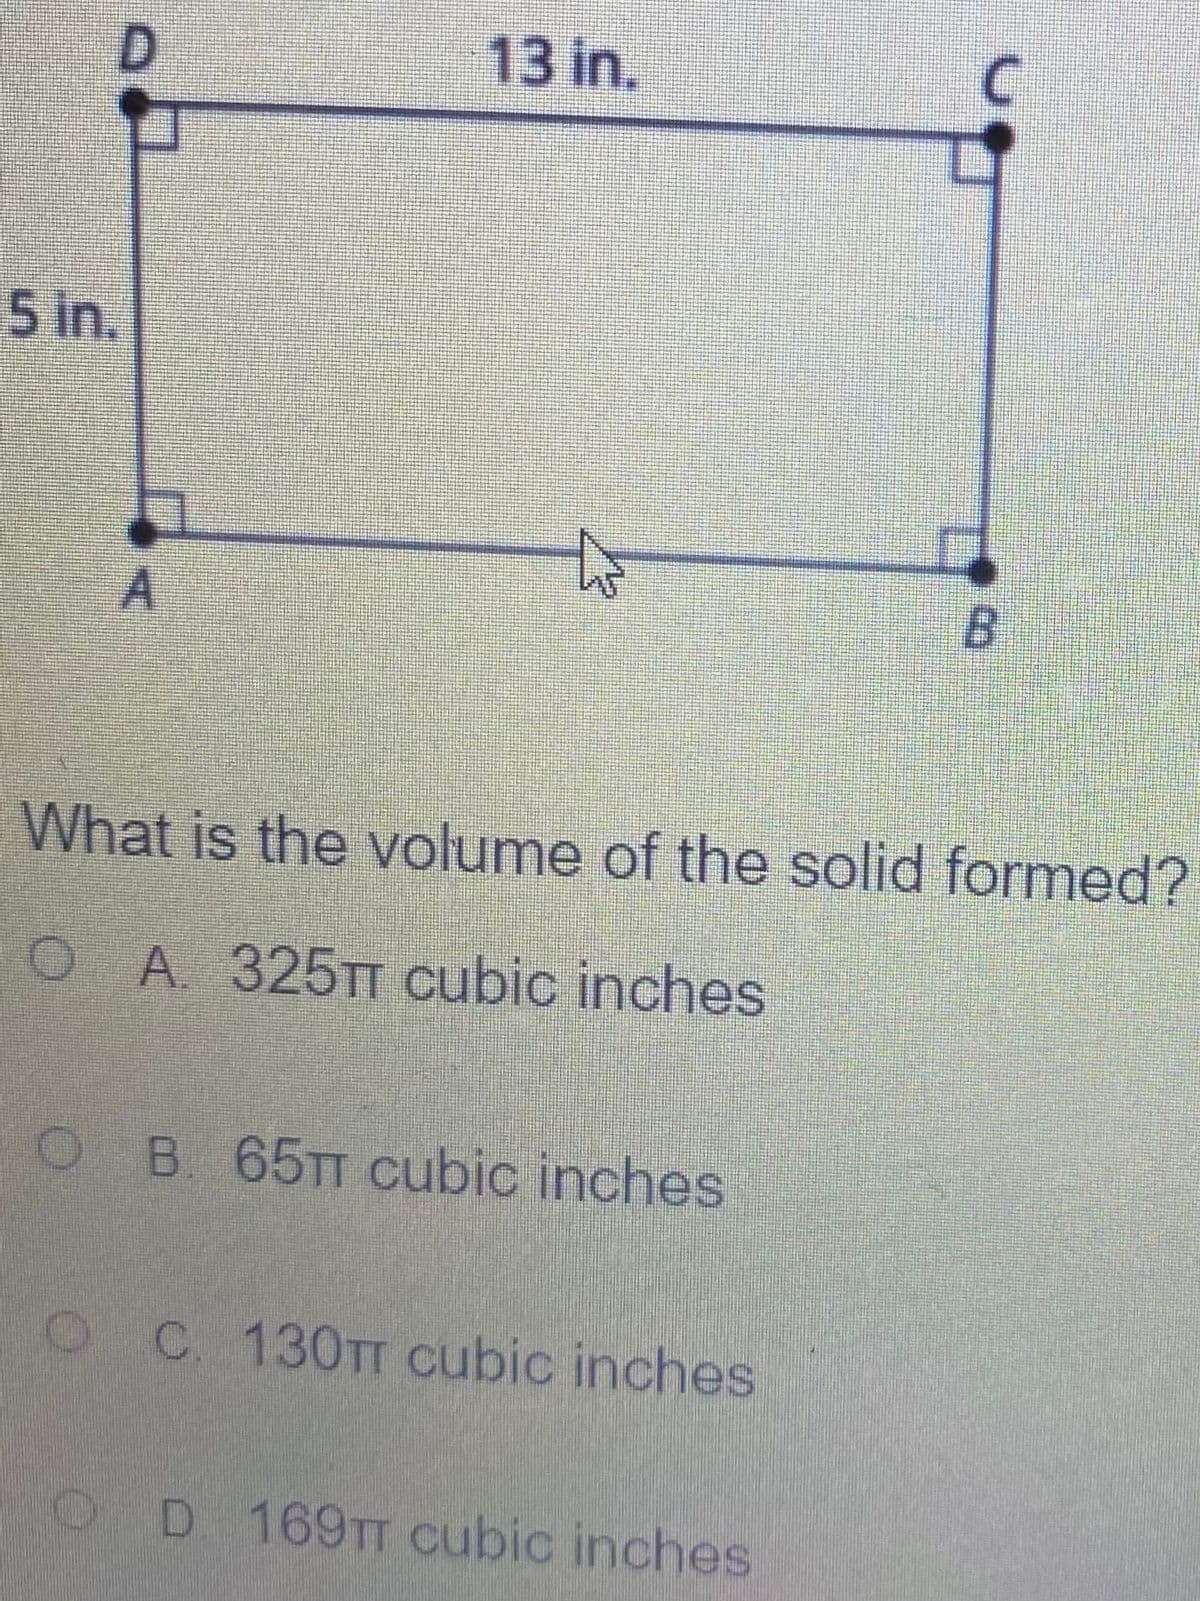 13 in.
5 in.
What is the volume of the solid formed?
O A. 325TT cubic inches
O B. 65TT cubic inches
OC 130TT cubic inches
OD 169TT cubic inches
D.
